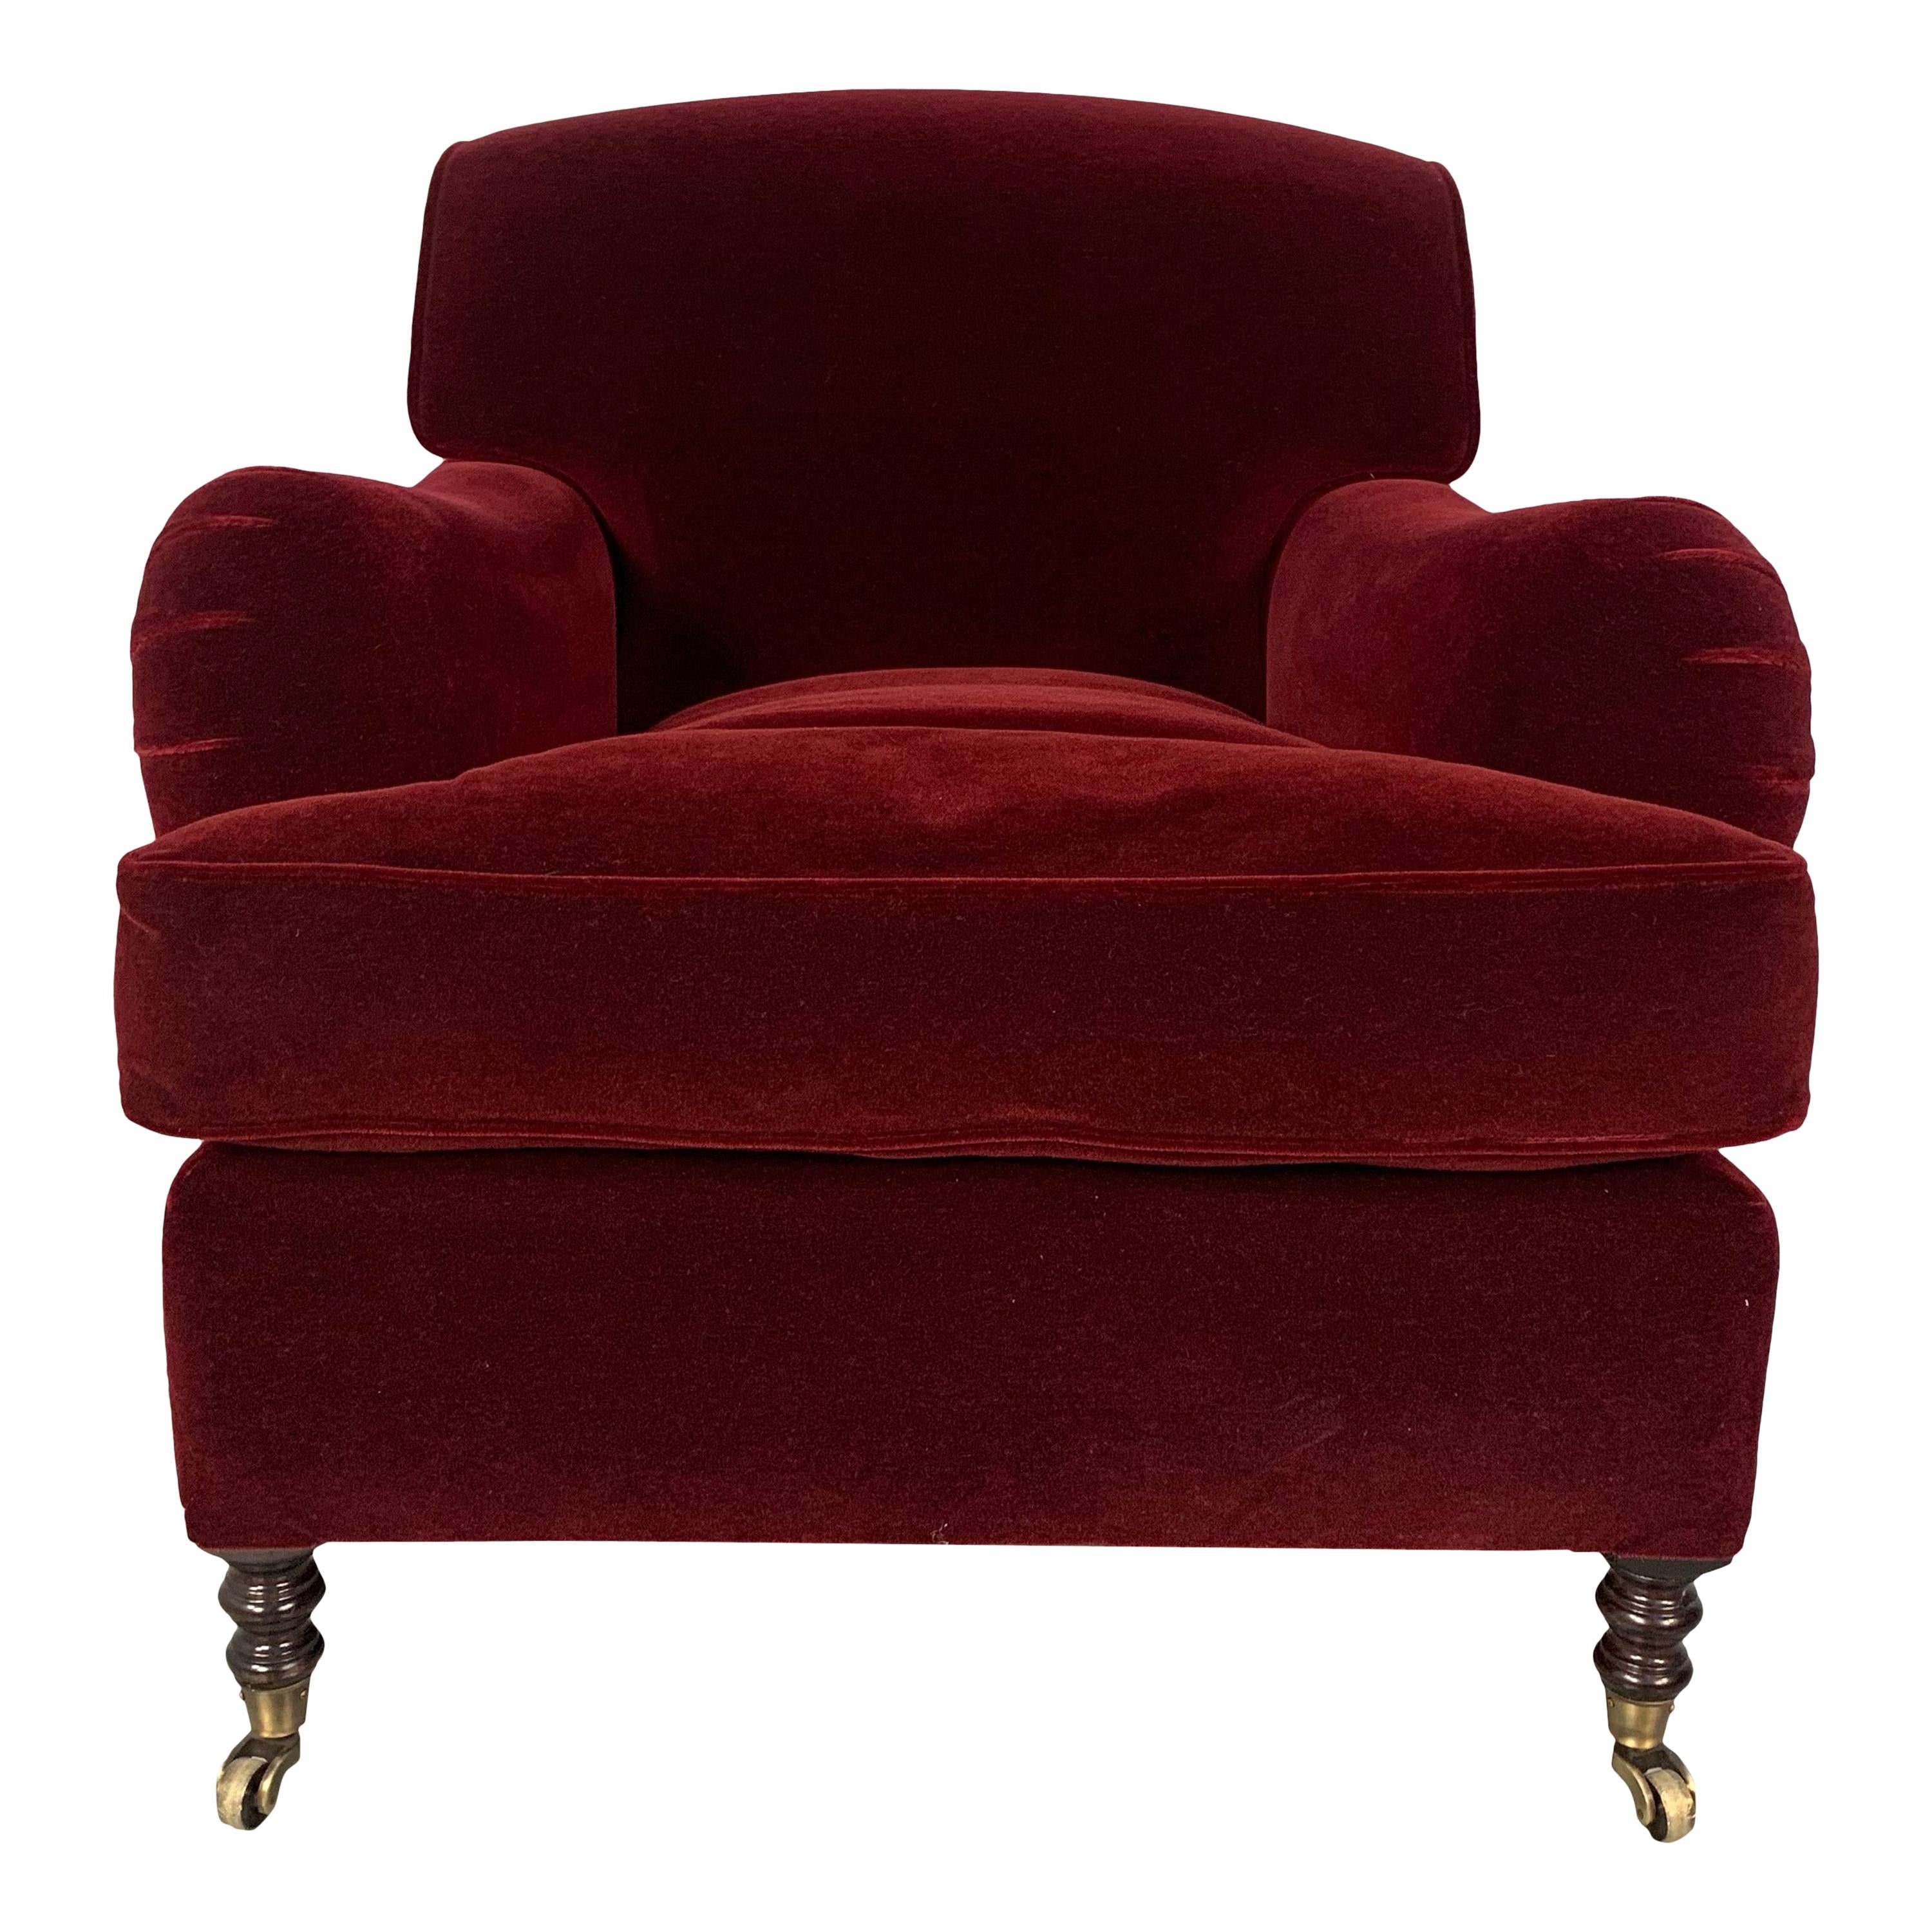 George Smith “Signature" Standard-Arm Armchair in Red Berry Mohair-Velvet